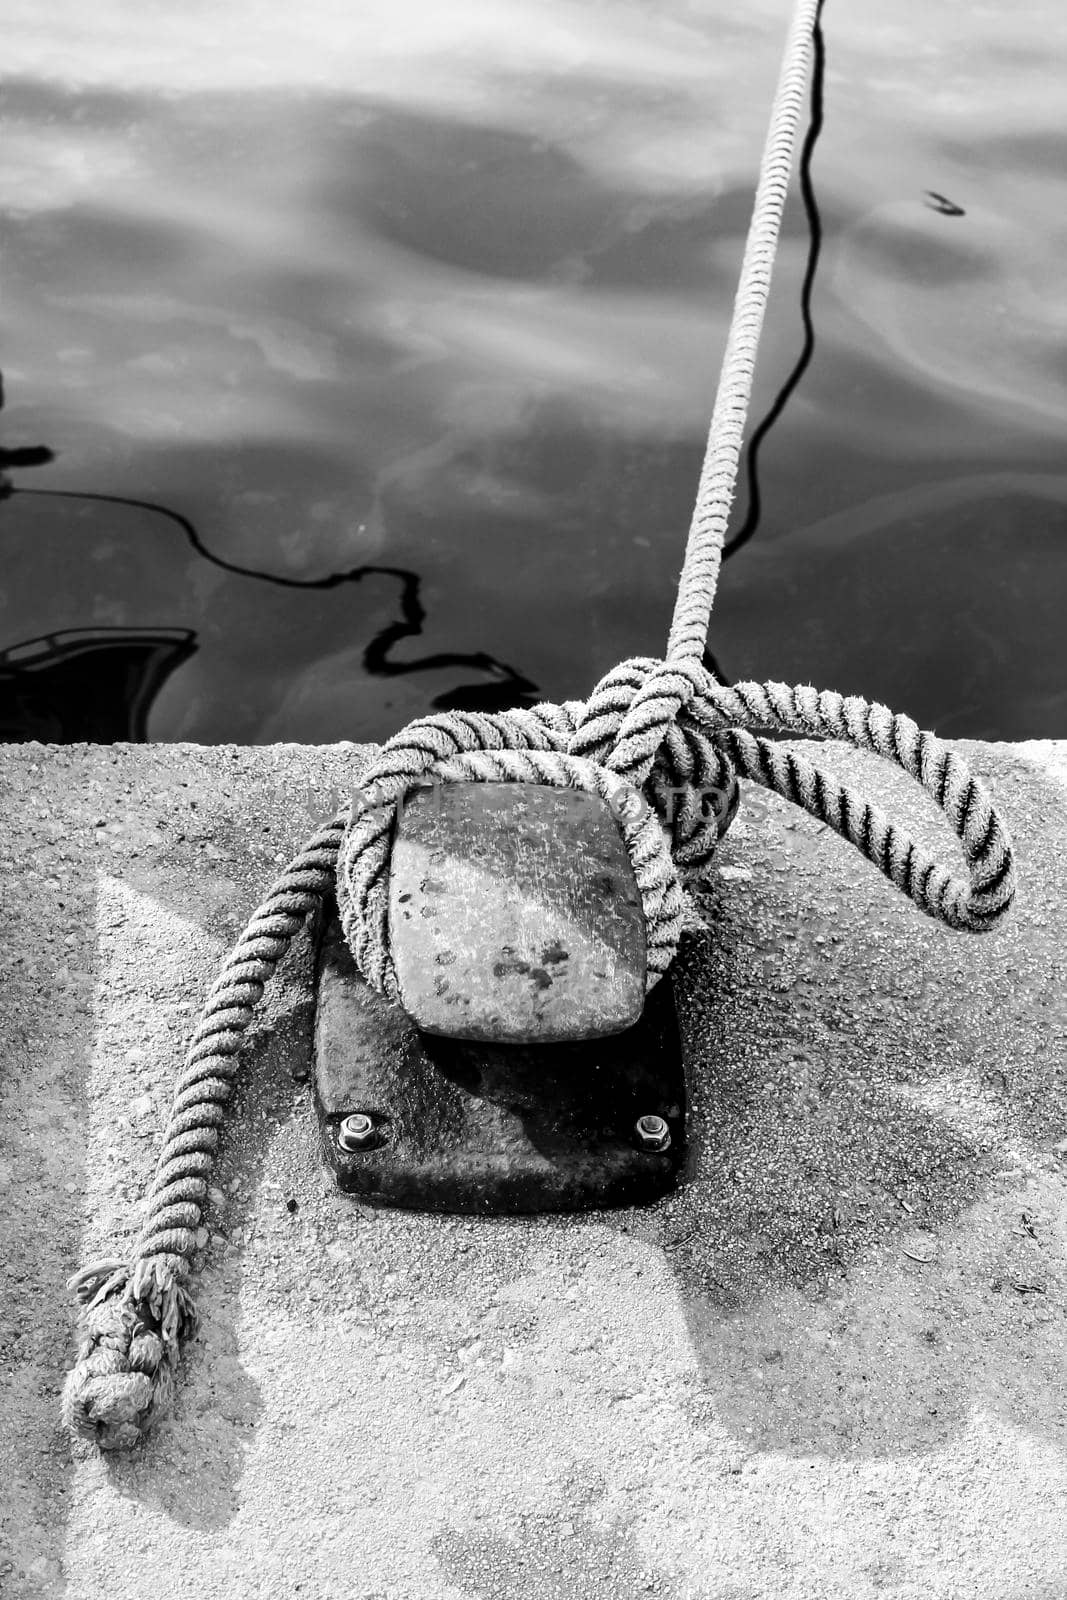 Rusty mooring bollard with tied rope in the port by soniabonet